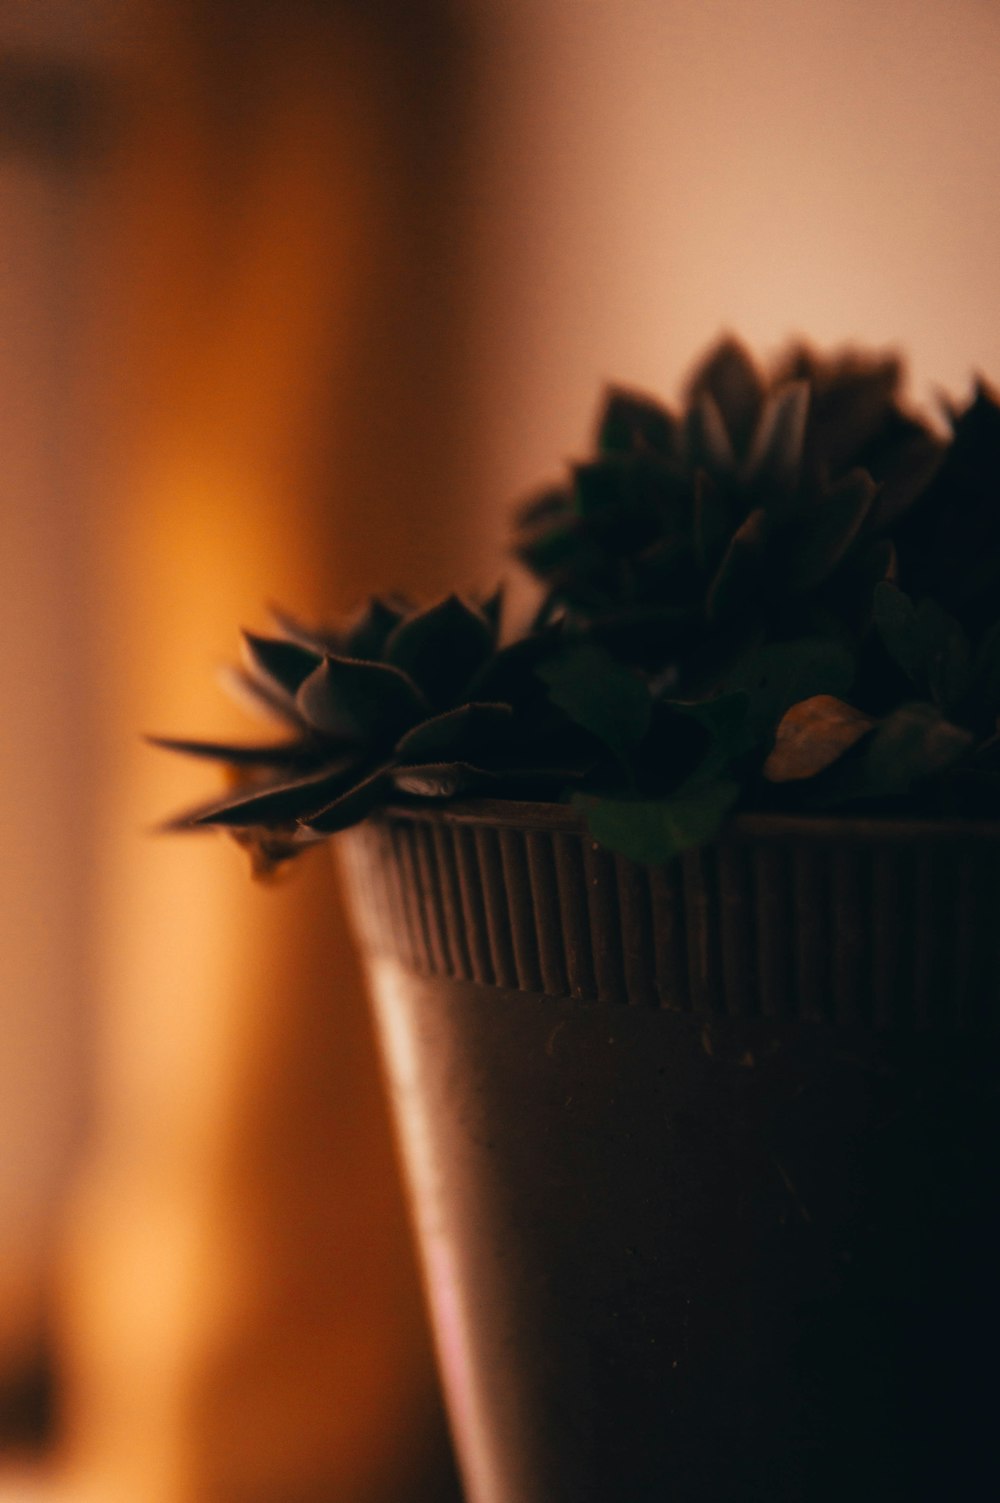 a close up of a potted plant on a table